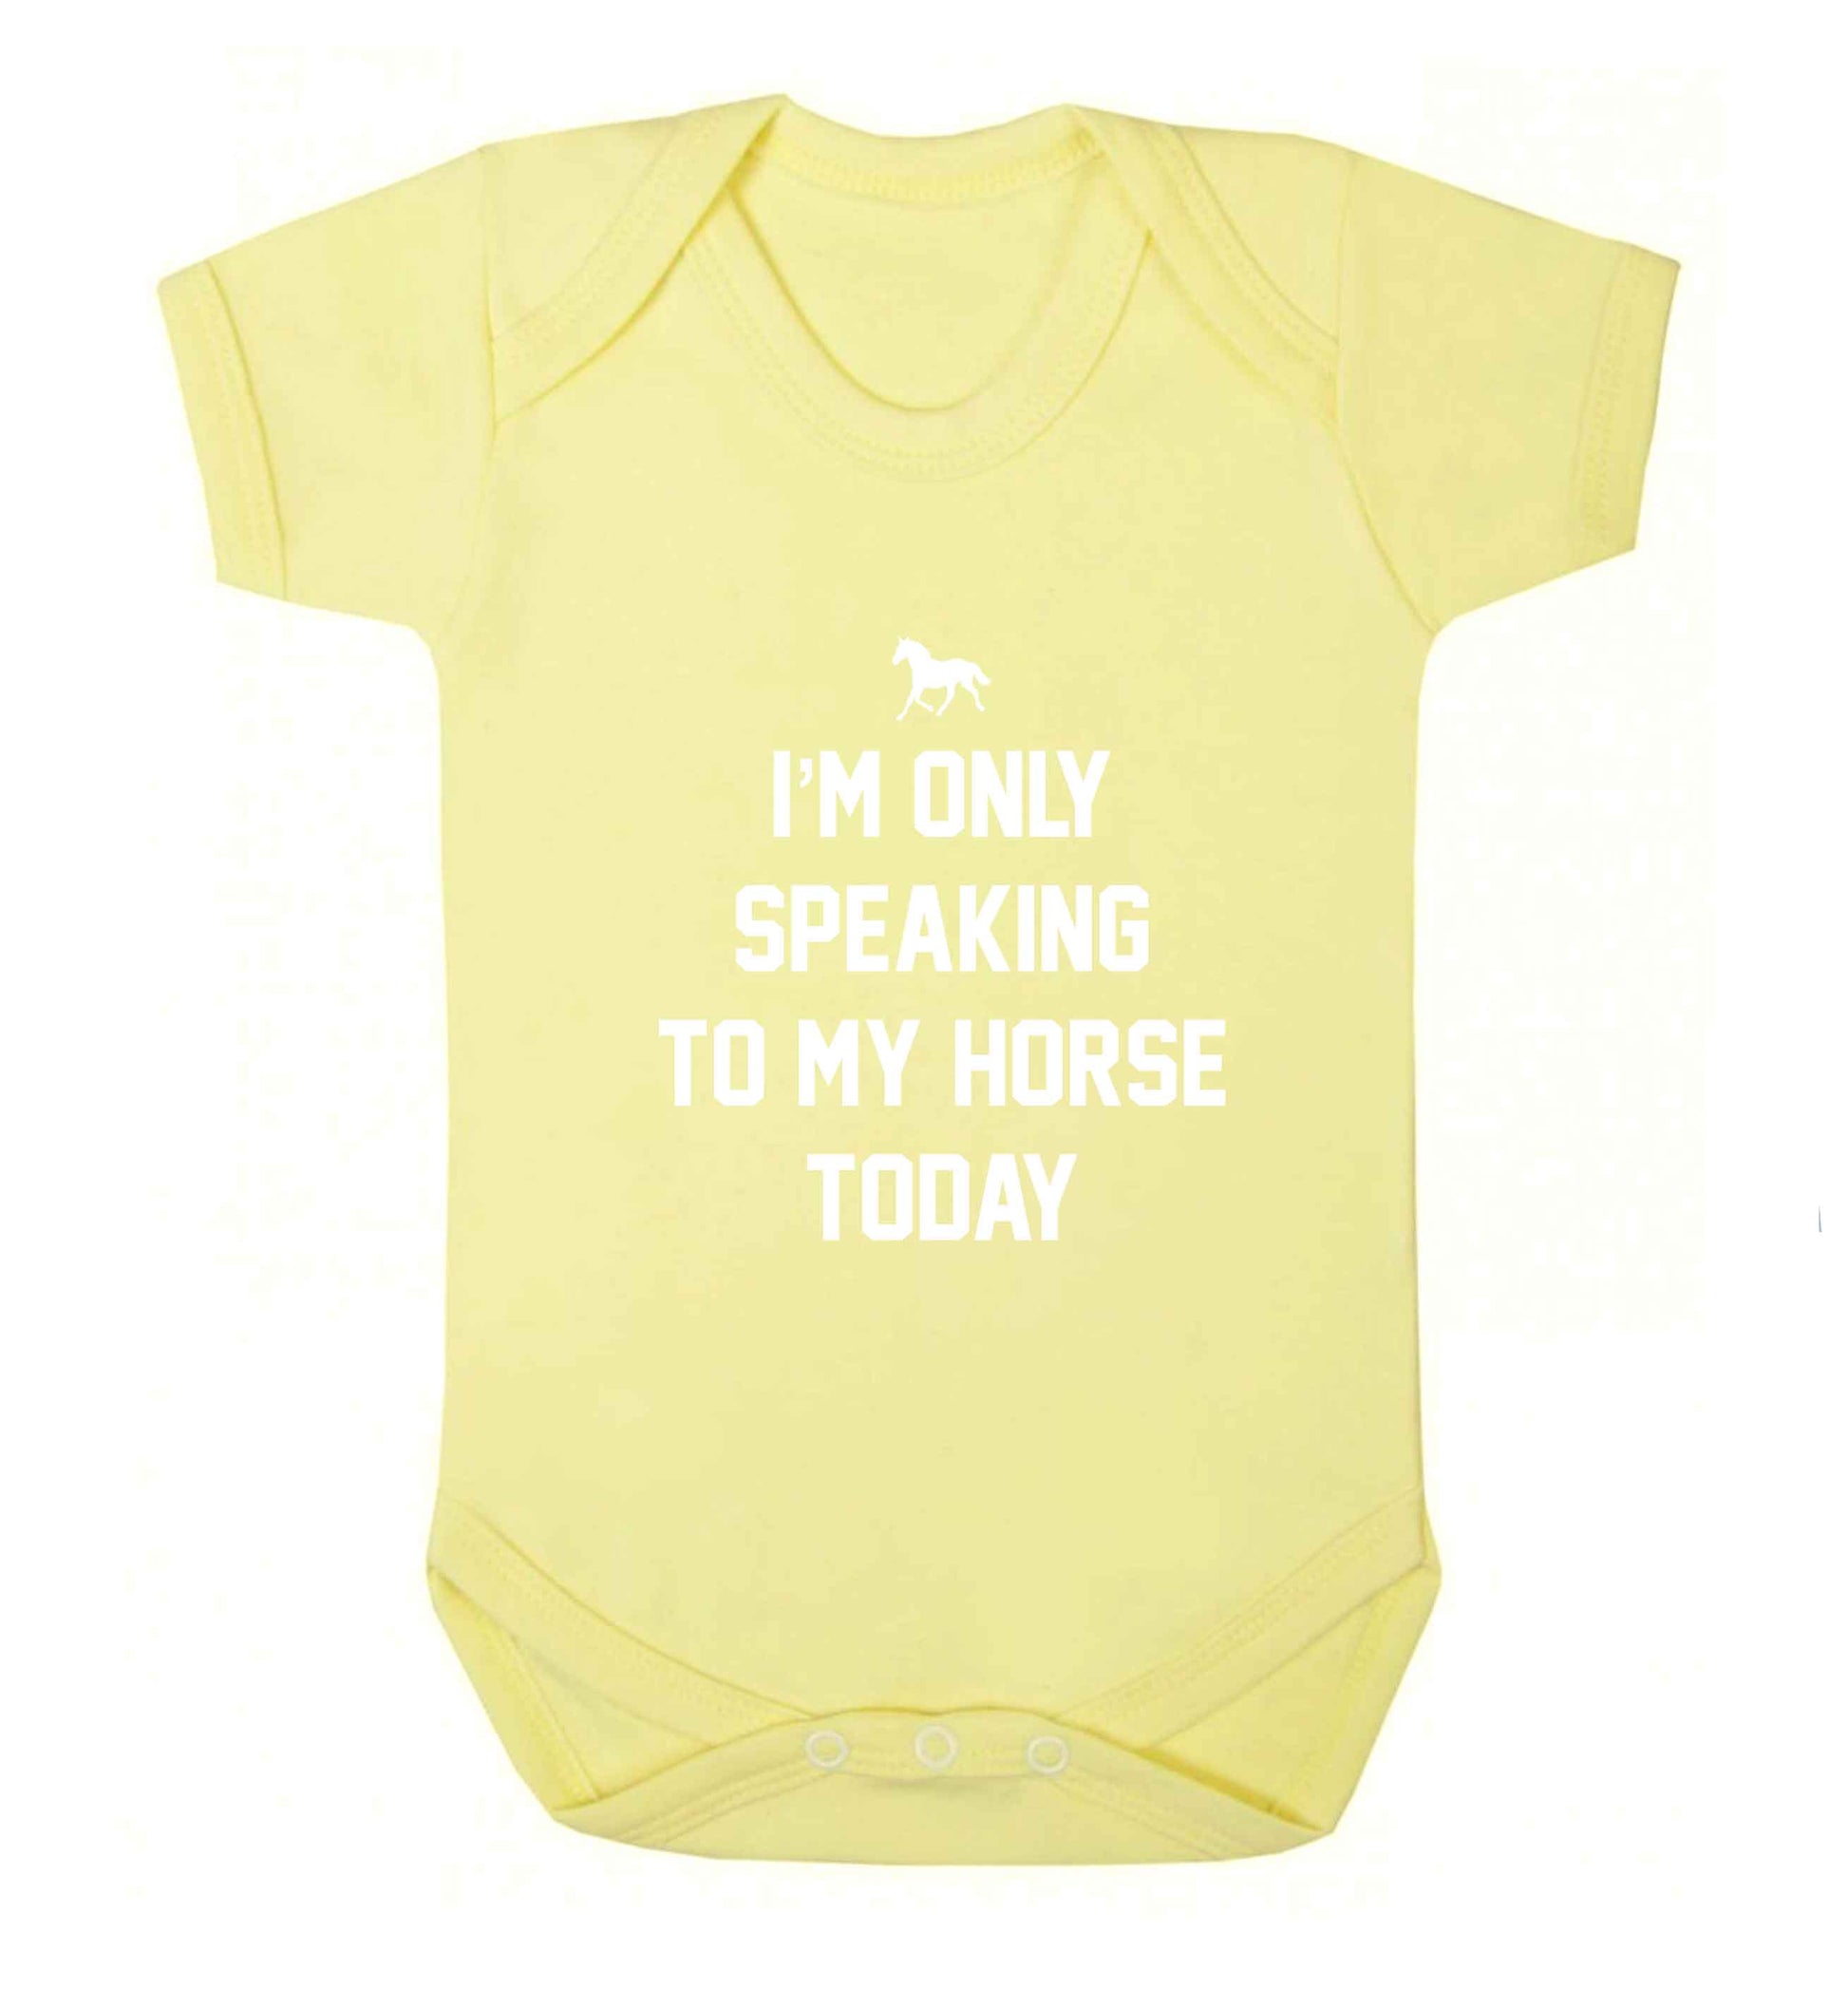 I'm only speaking to my horse today baby vest pale yellow 18-24 months